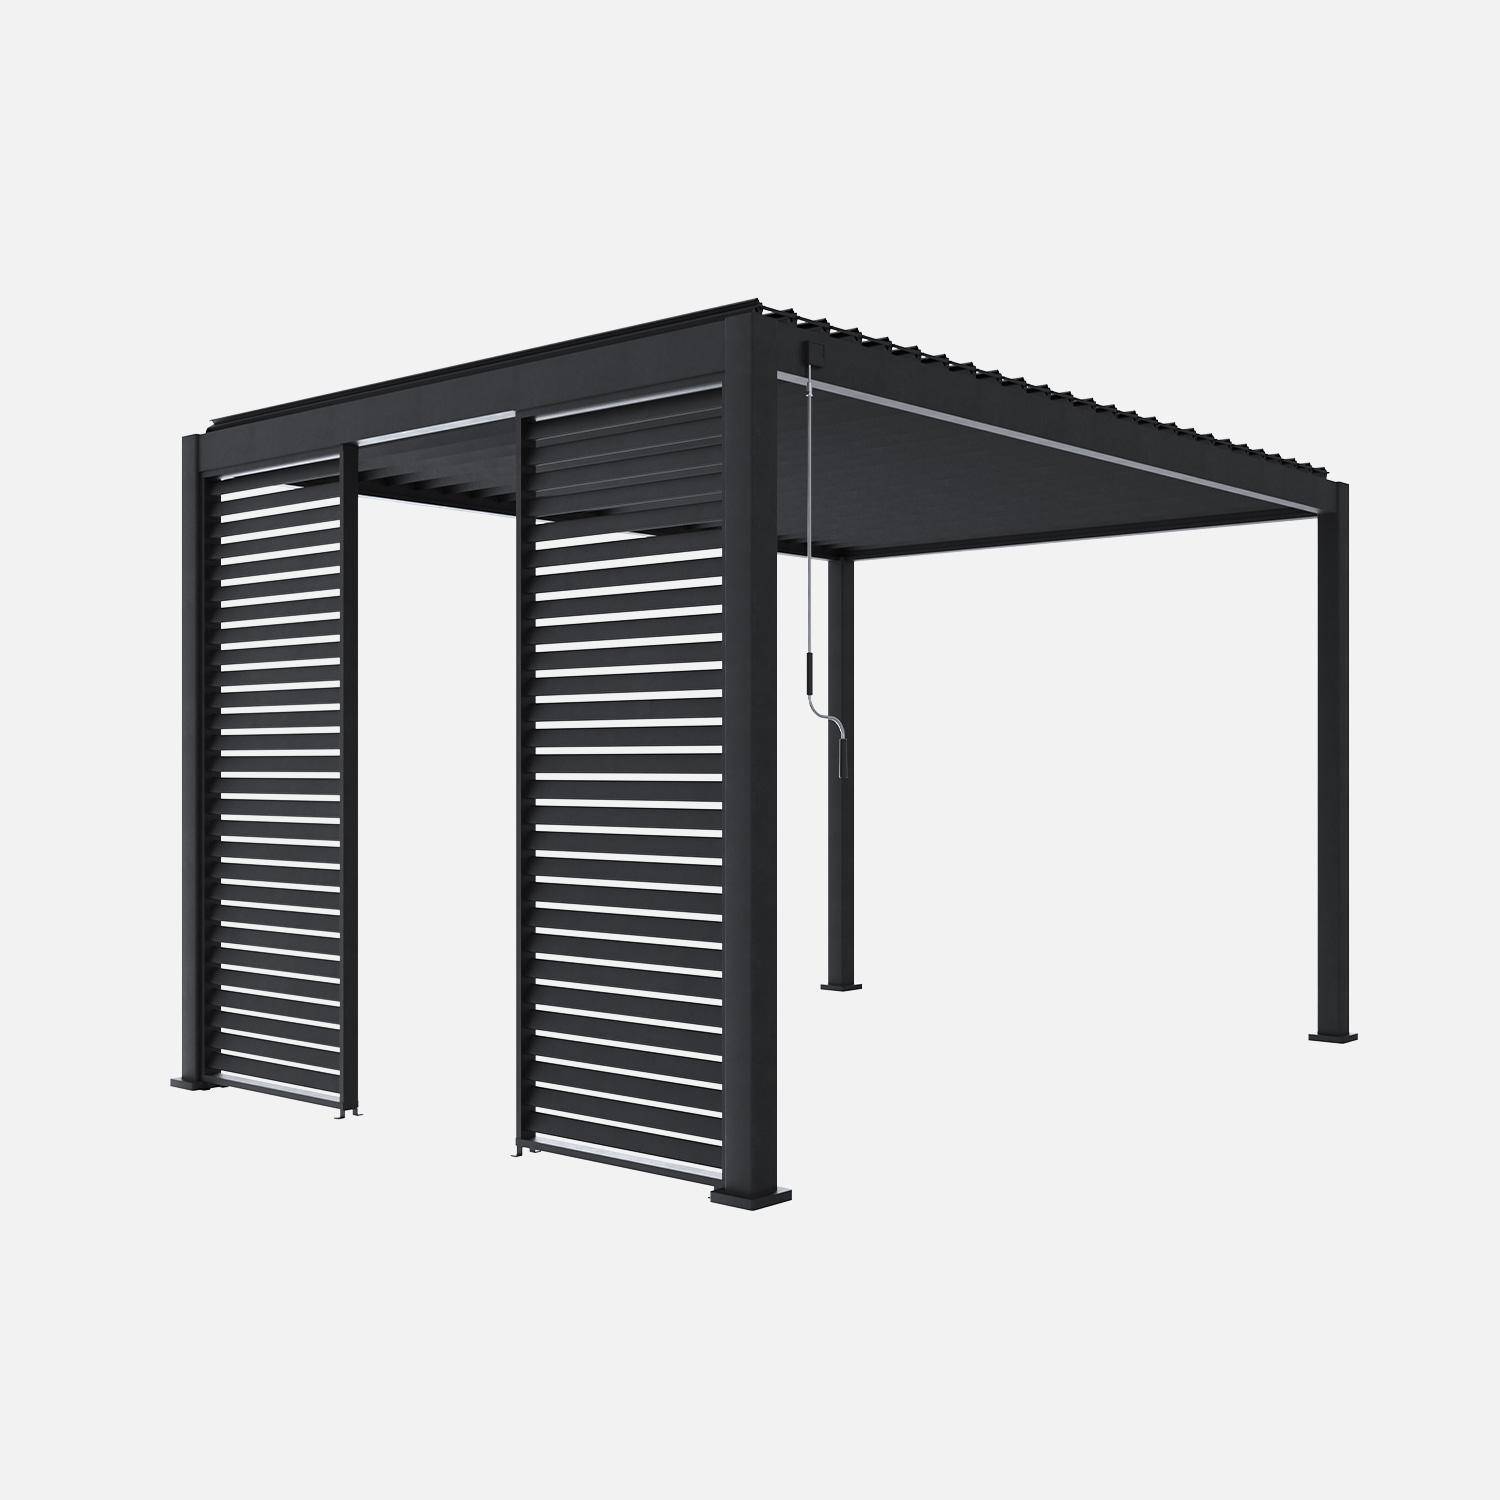 100cm Aluminium anthracite side panel for triomphe louvered pergola (3x4 and 3x3v2),sweeek,Photo5